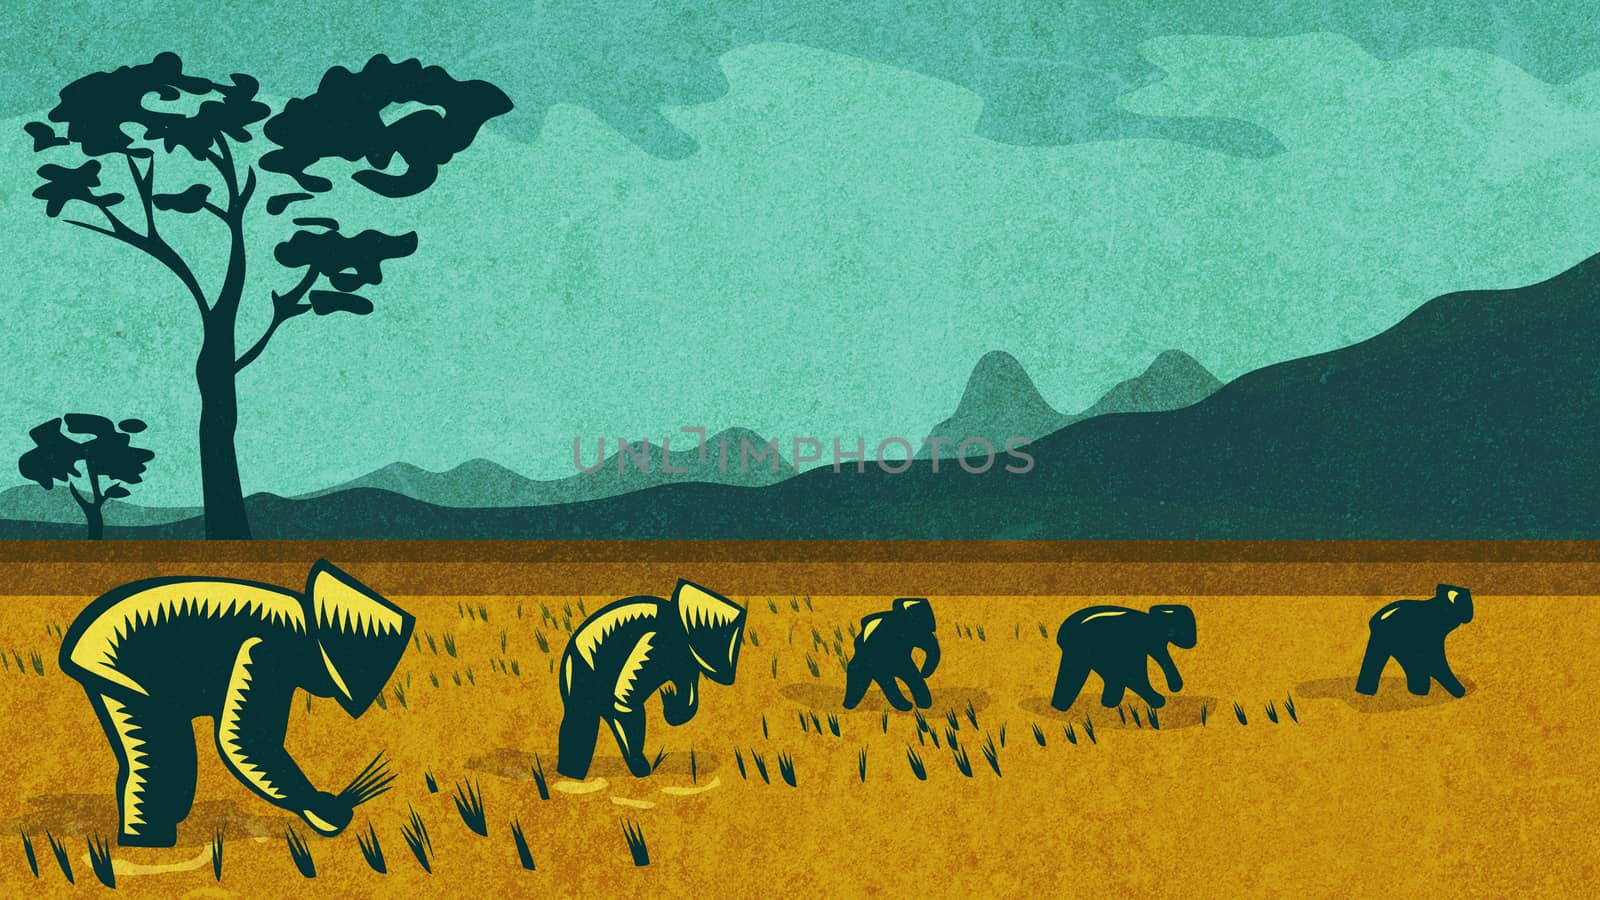 Retro style illustration of a Vietnamese or South East Asian farmers planting rice in rice paddy field with mountains in background.